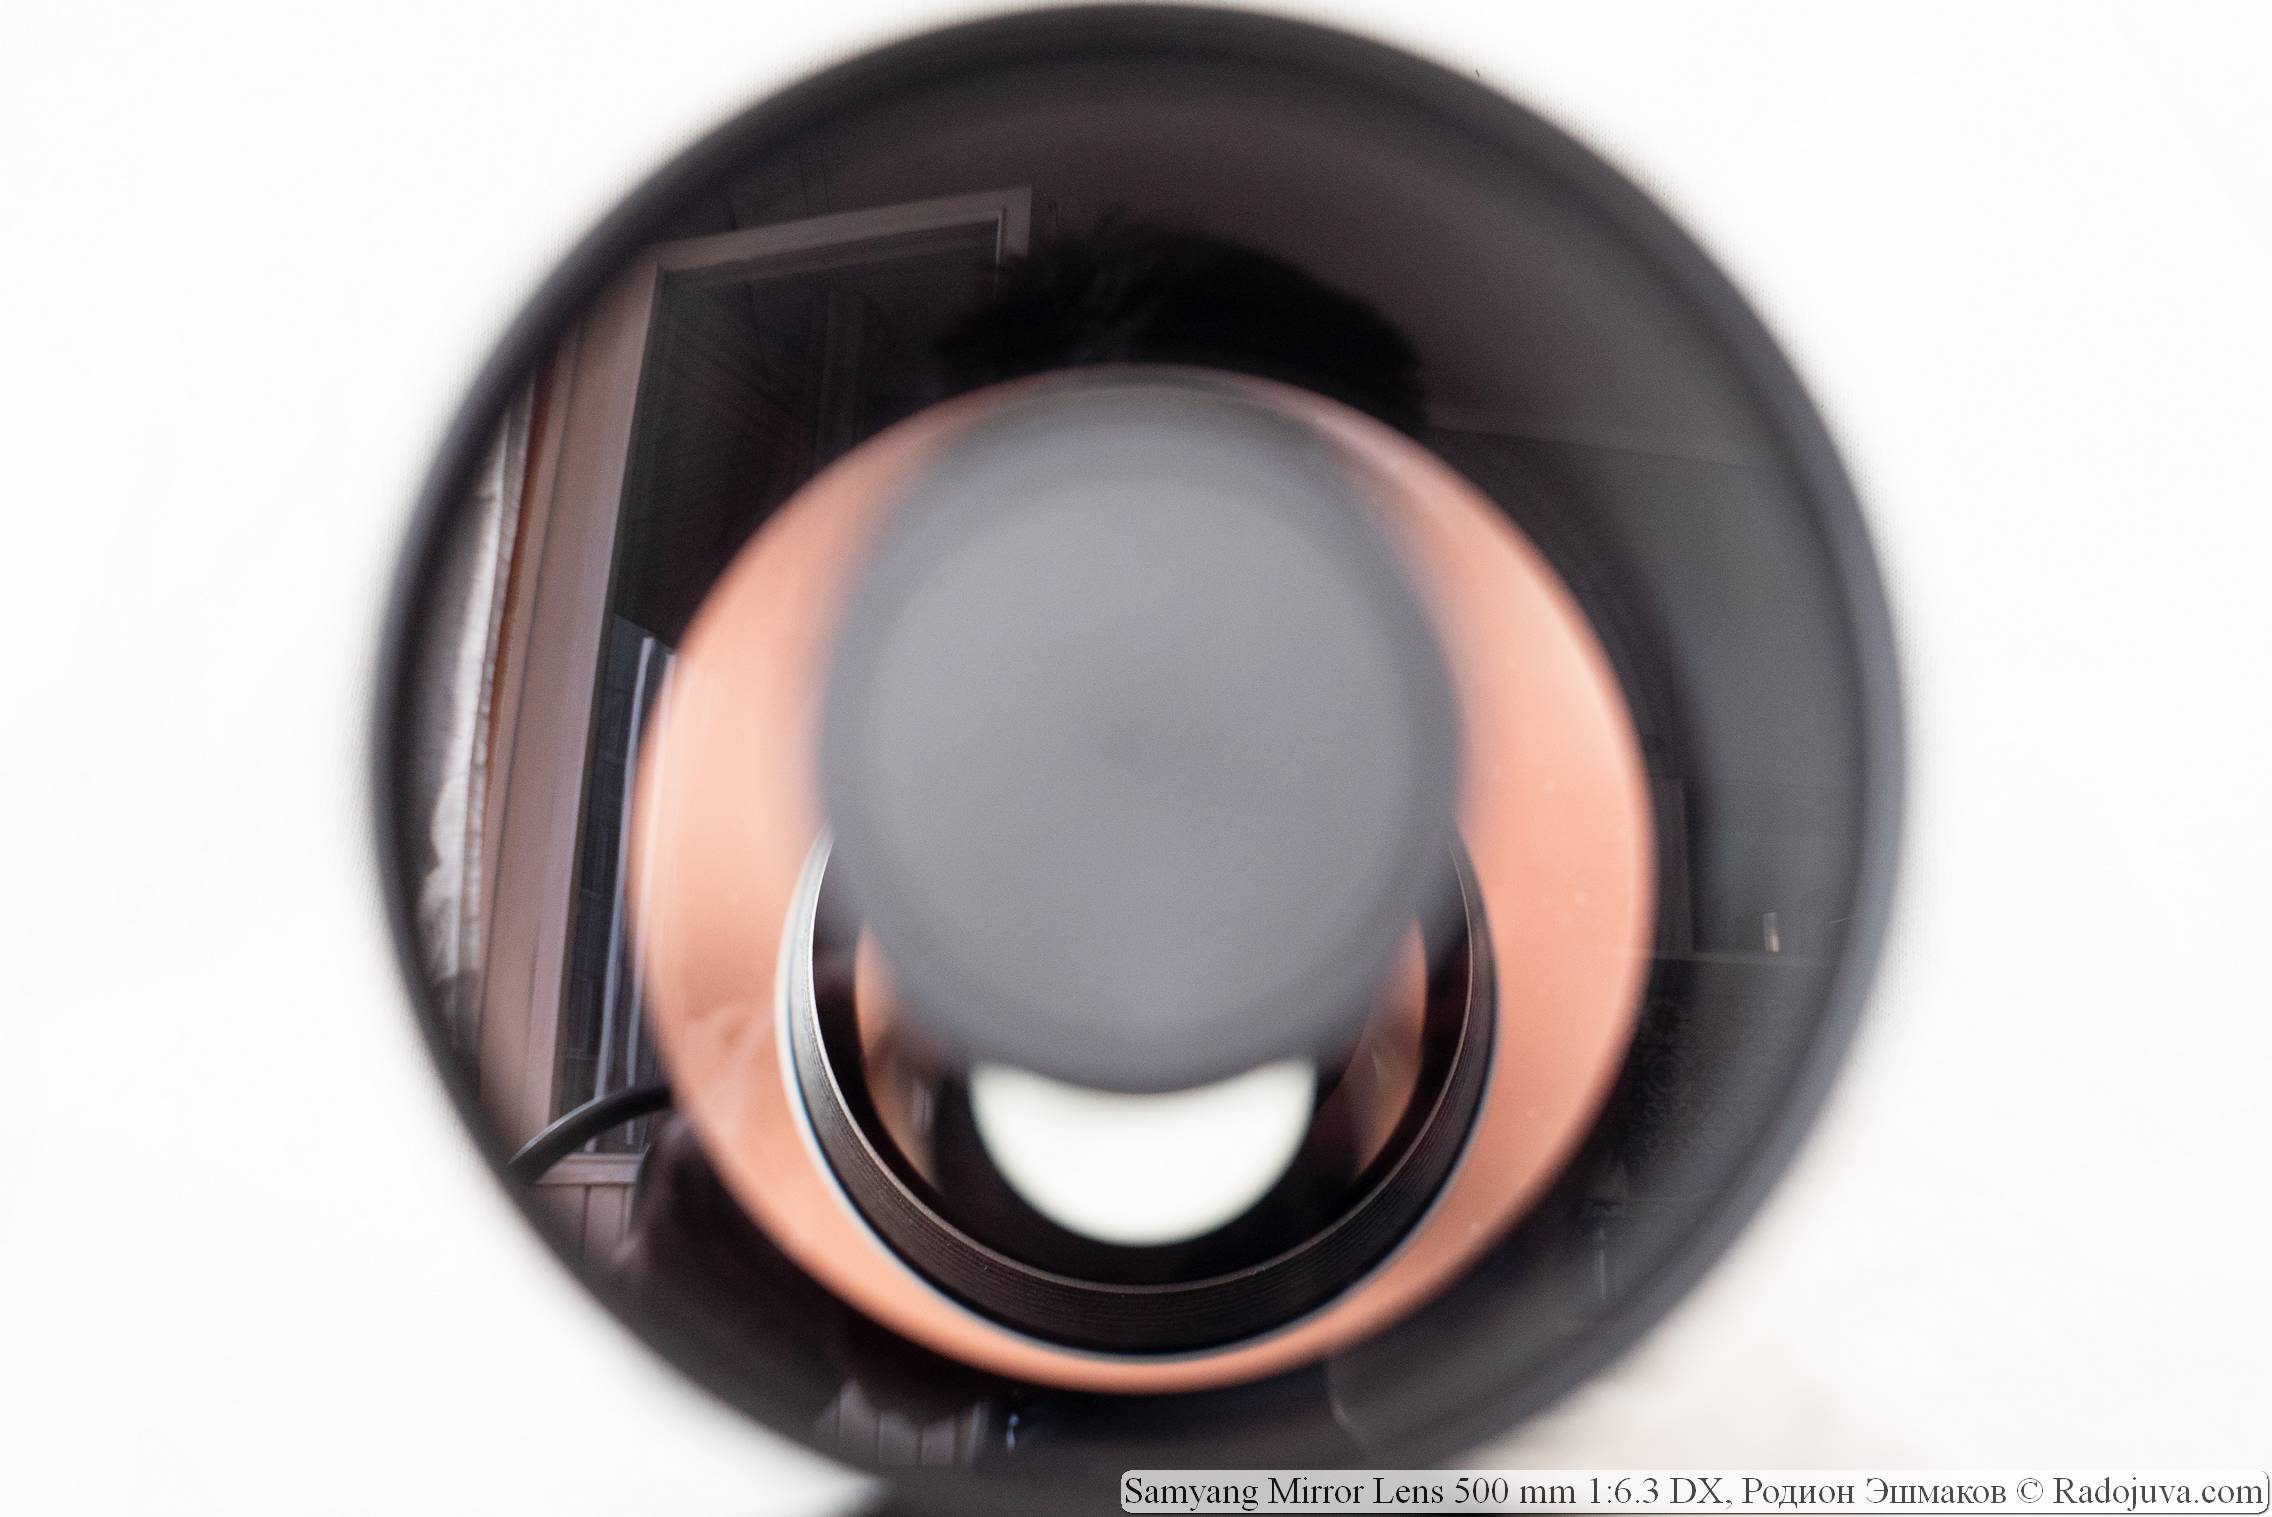 View of the carrot aperture of the Samyang 500 / 6.3 lens through the front lens.